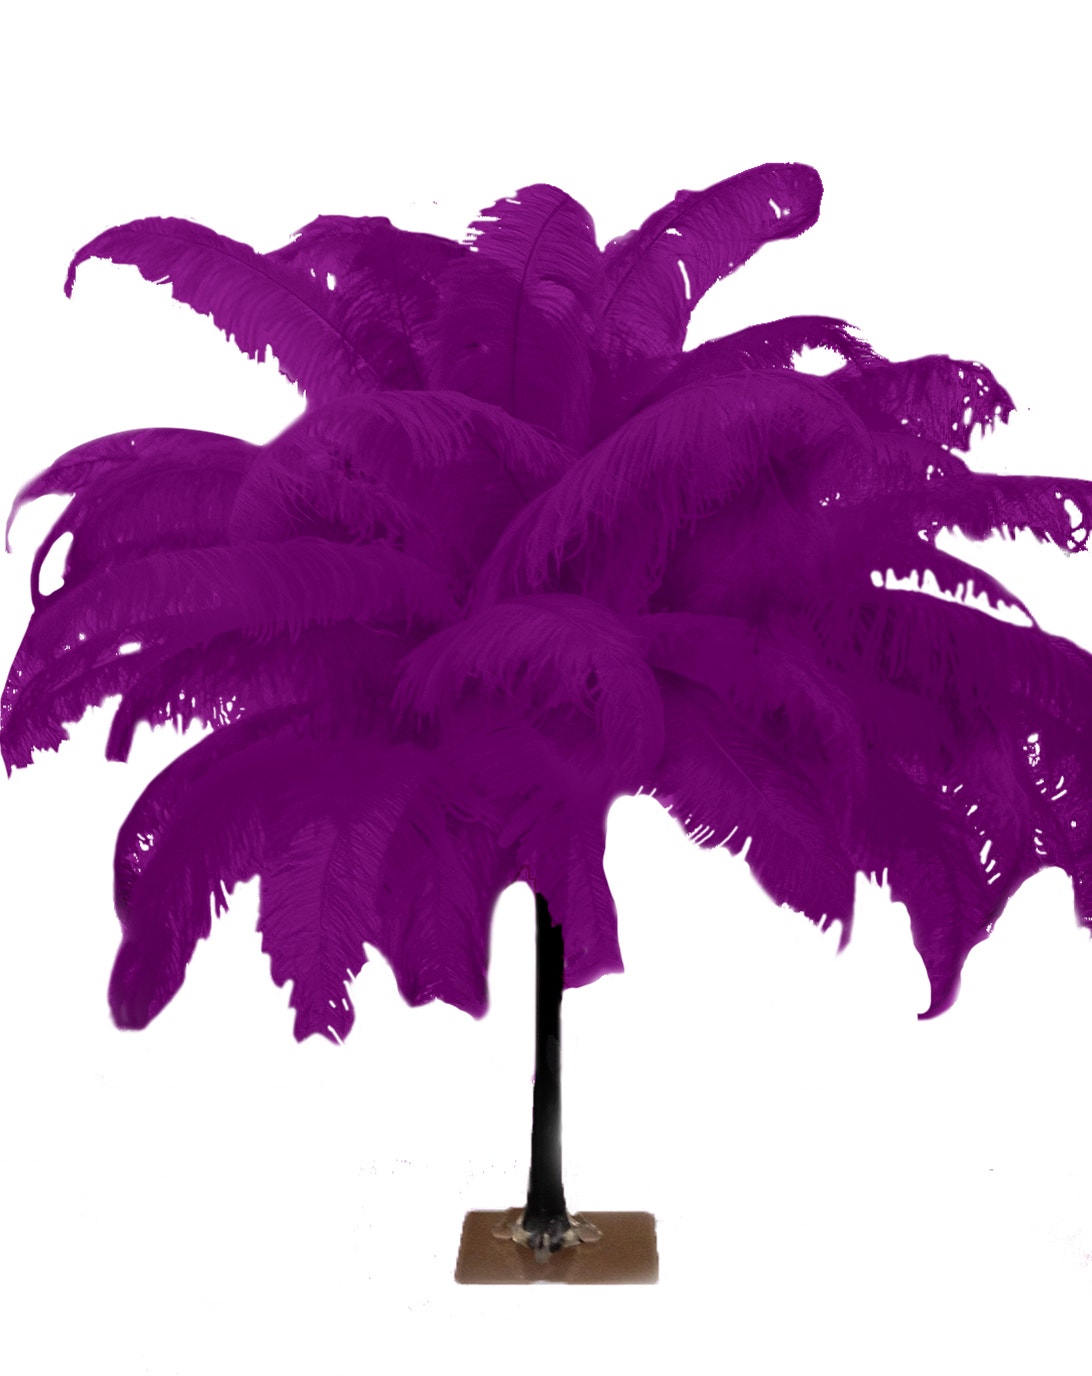 Large Ostrich Feathers - 18-24" Spads - Very Berry